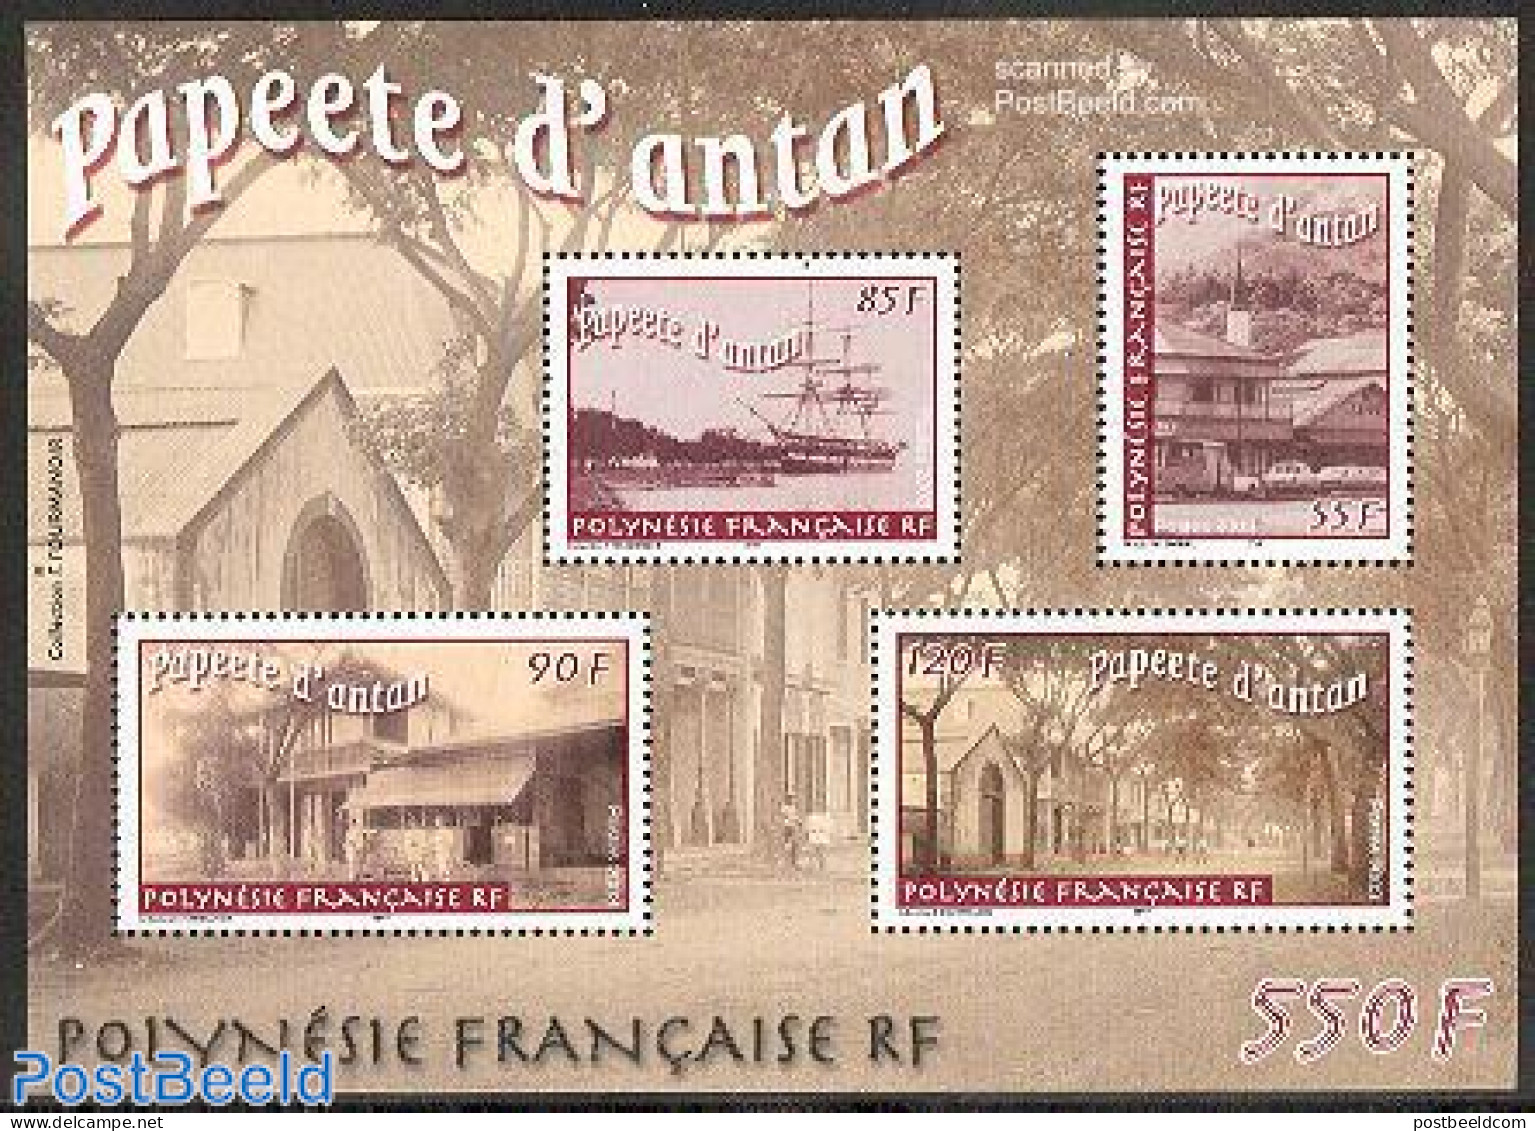 French Polynesia 2003 Papeete In The Past S/s, Mint NH, Sport - Transport - Cycling - Automobiles - Ships And Boats - Nuovi